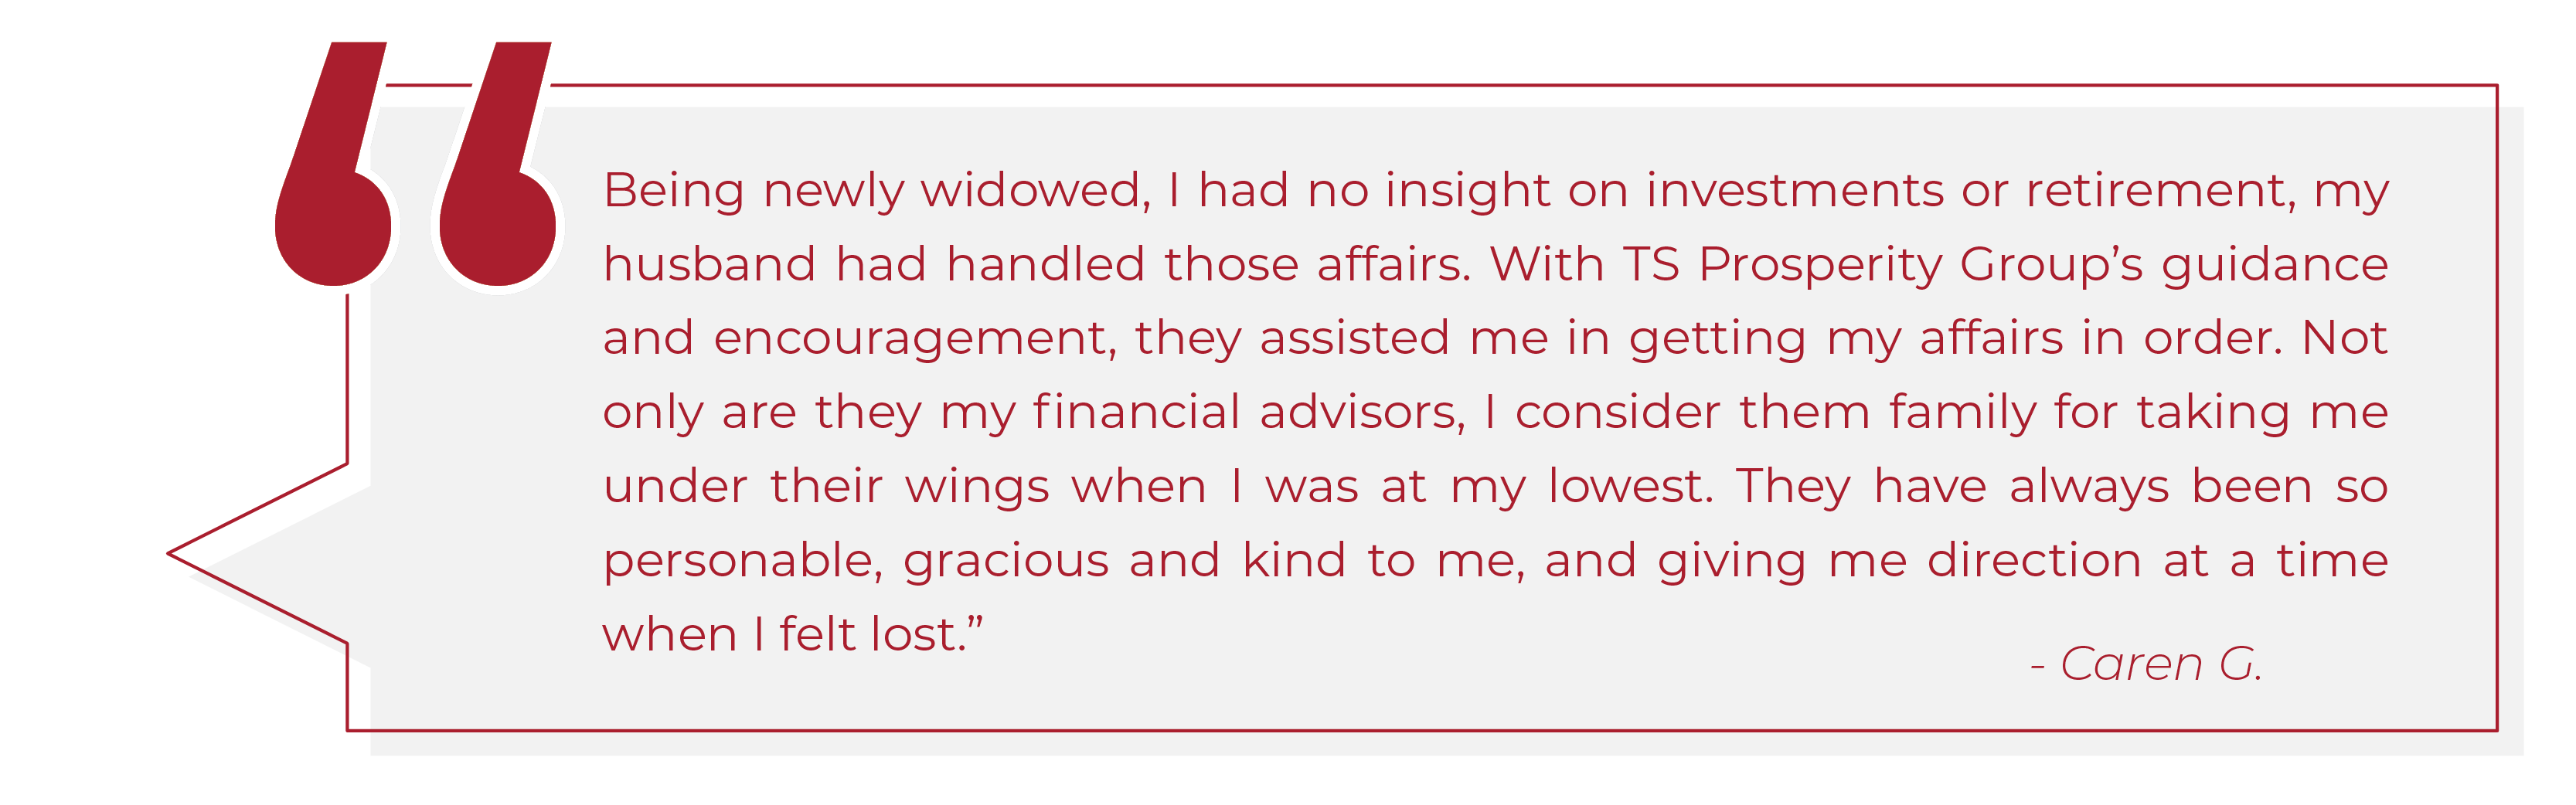 client testimonial for TS Prosperity Group